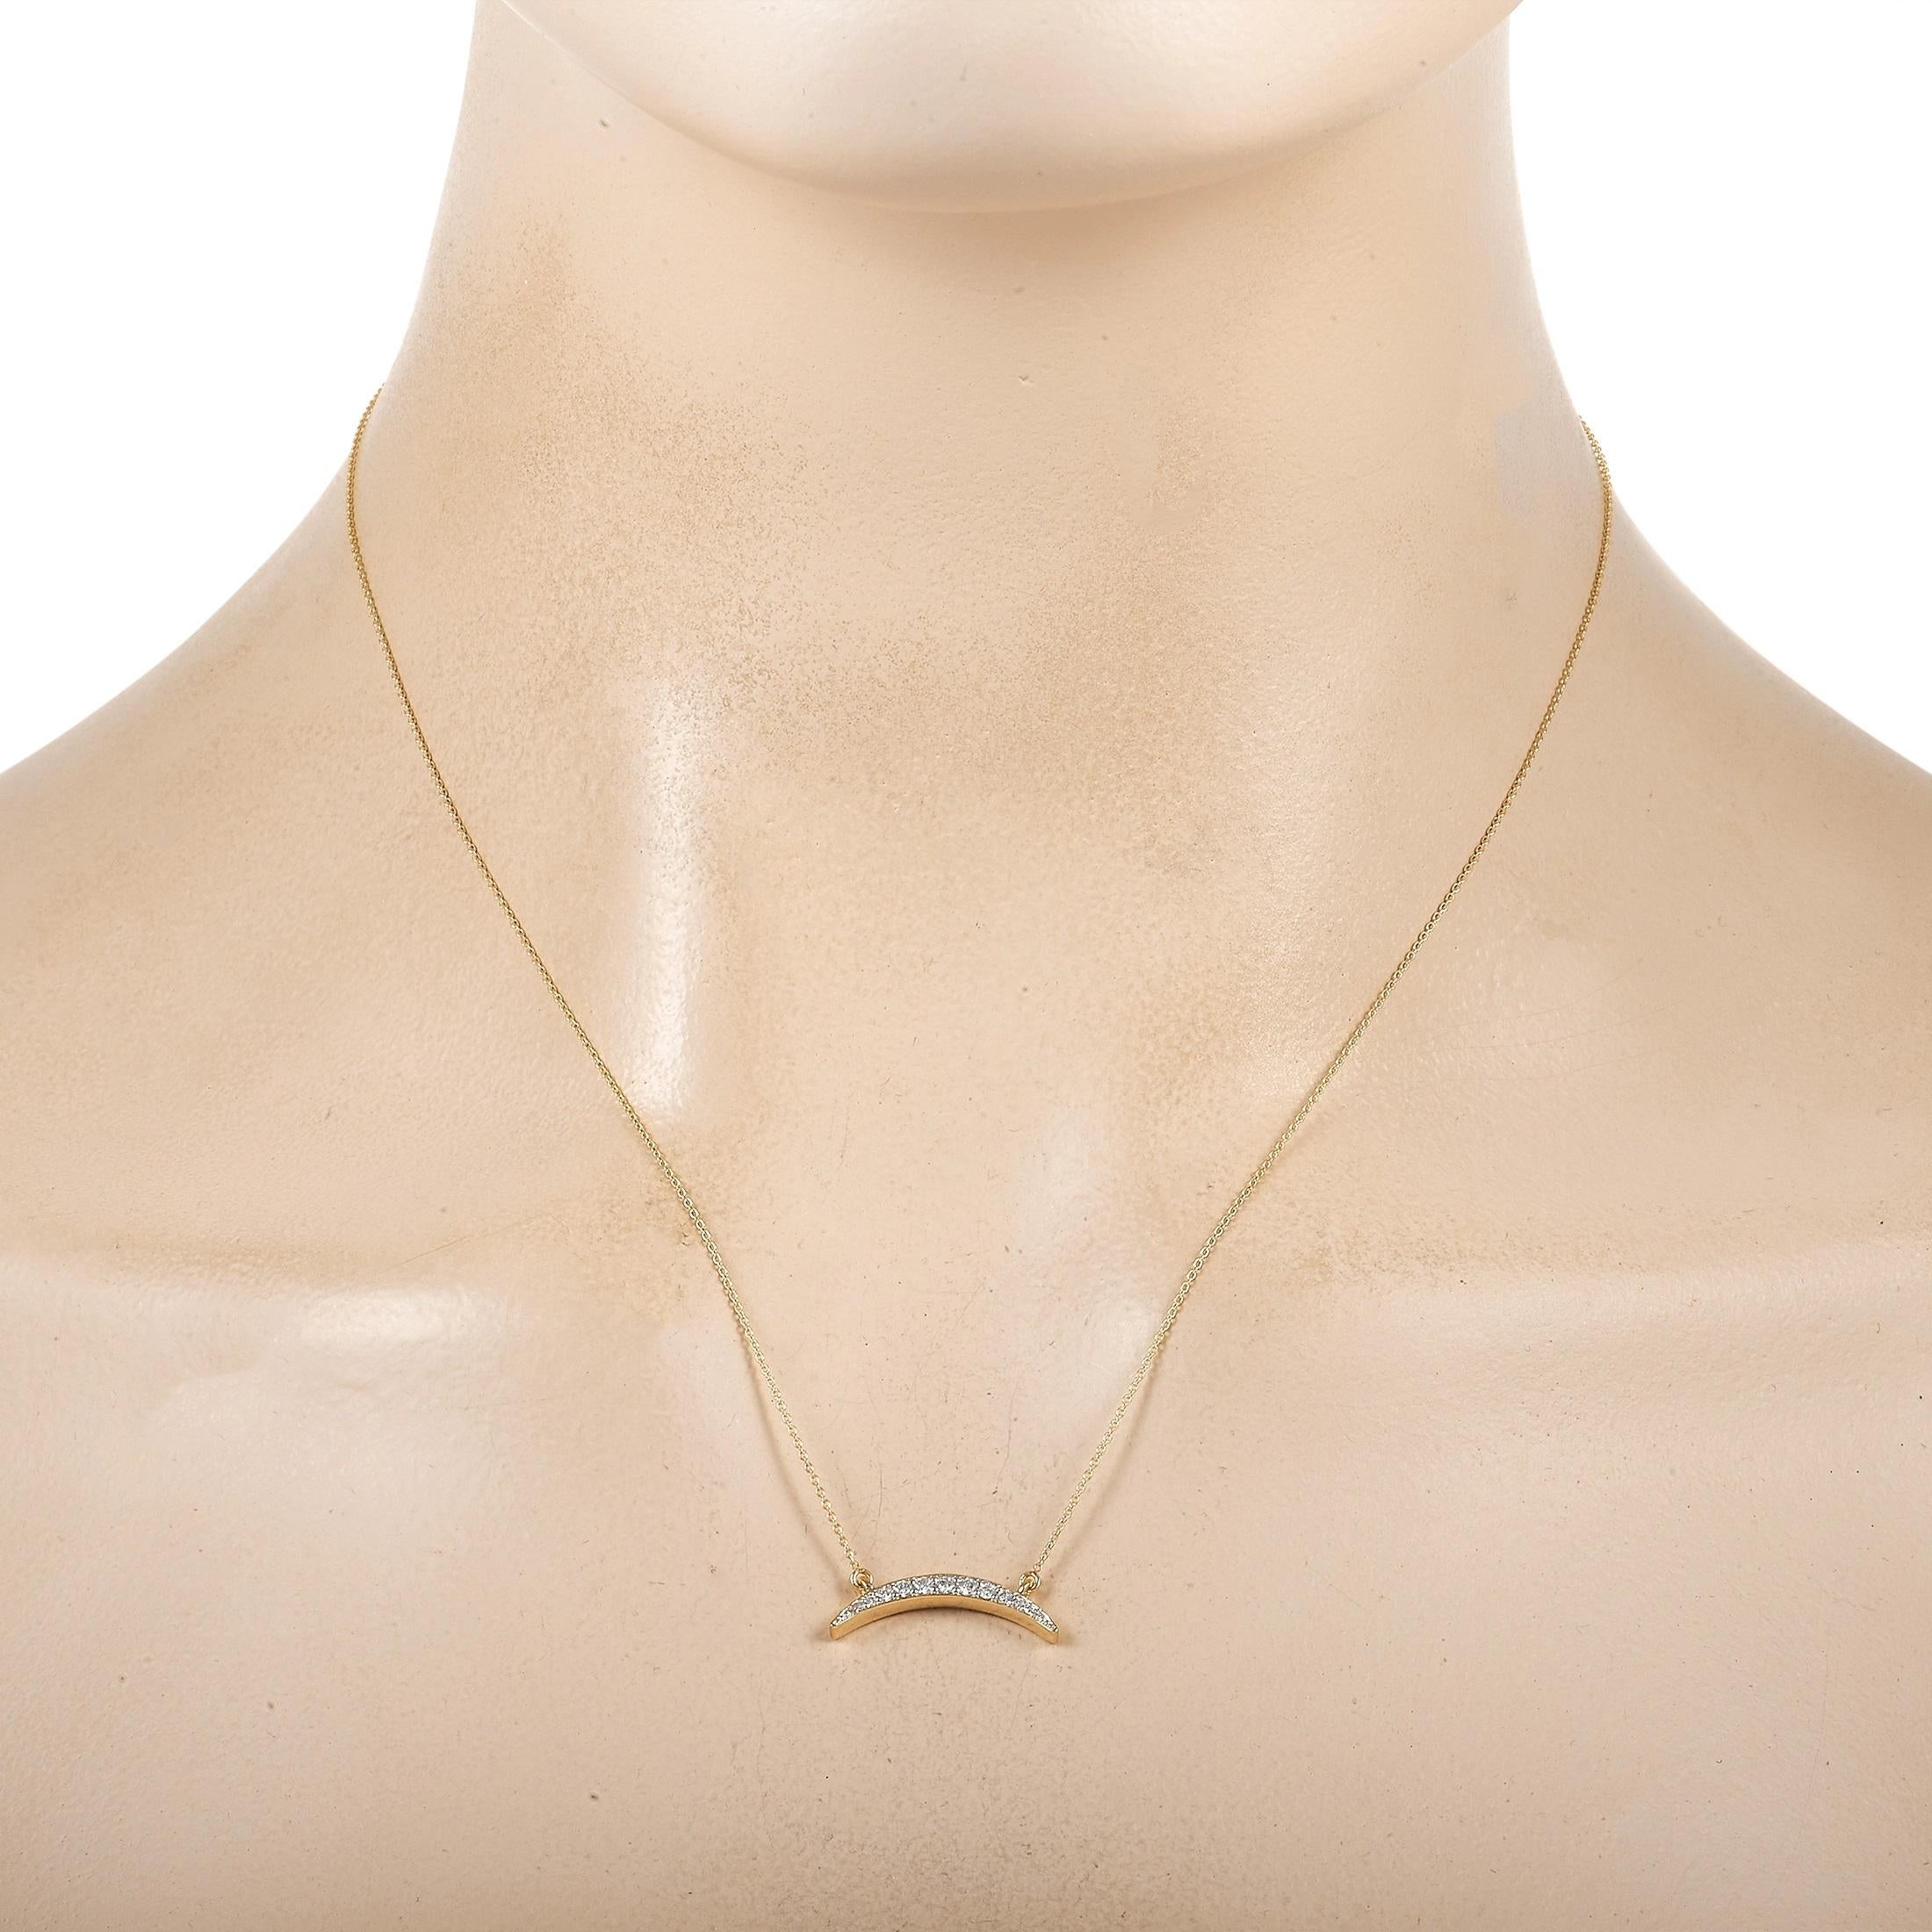 This pretty LB Exclusive necklace is sure to wow. The necklace is made with a yellow gold chain, highlighting a beautiful 14K yellow gold half-moon pendant. The face of the pendant is set with a row of round-cut diamonds, totaling 0.16 carats. The